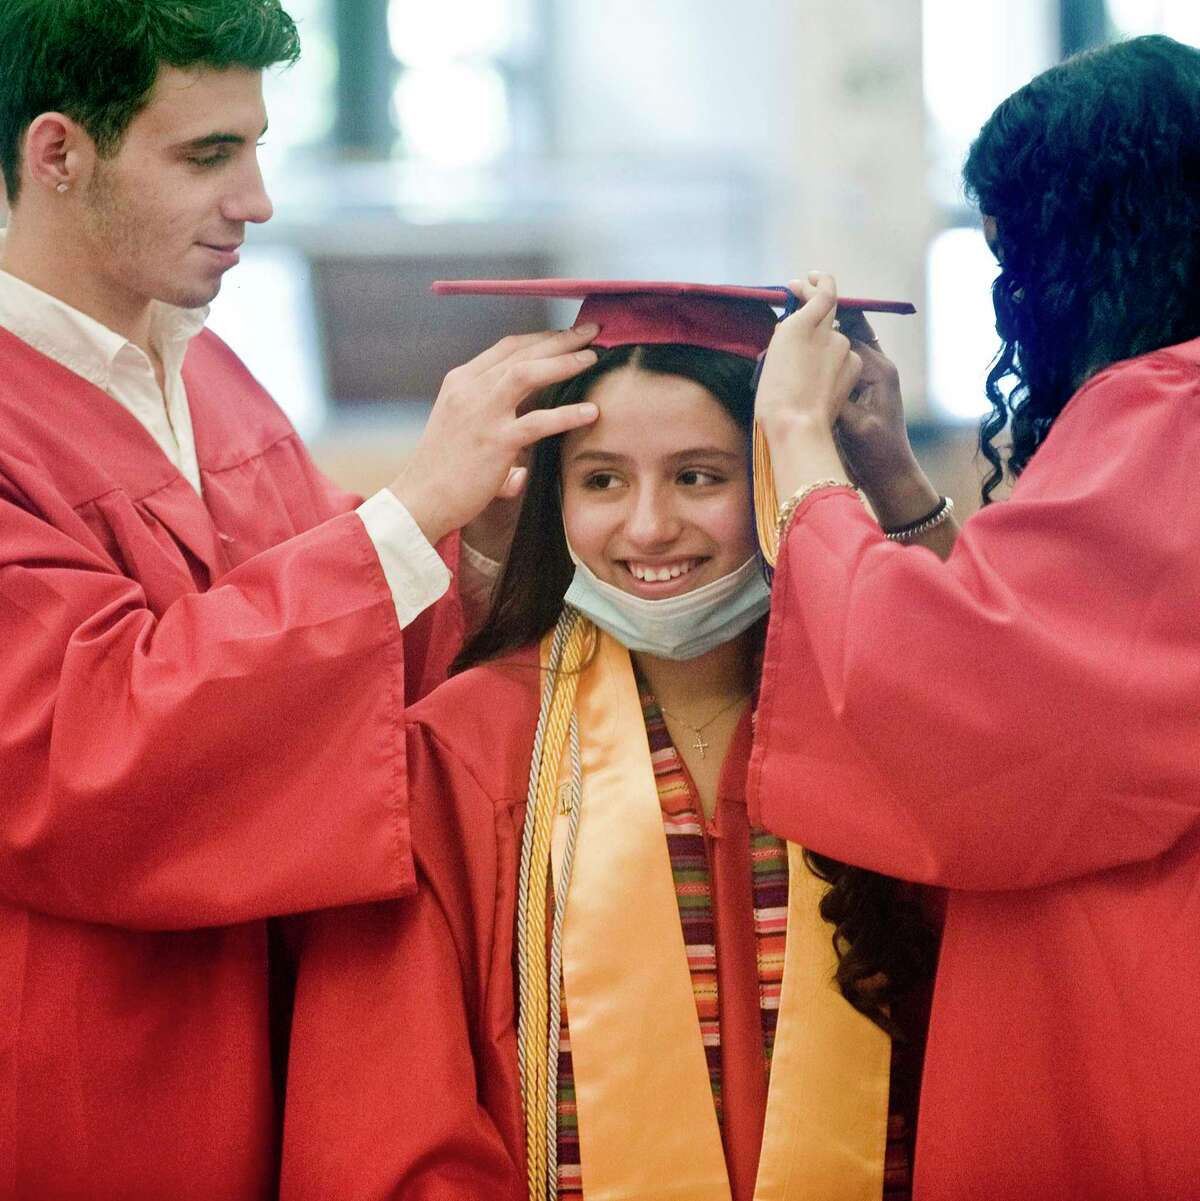 Lesly Vidal gets some hat help from Niholas Palumbo, left, and Kimberly Huertas, right, at the JM Wright Technical High School graduation. Monday, June 14, 2021